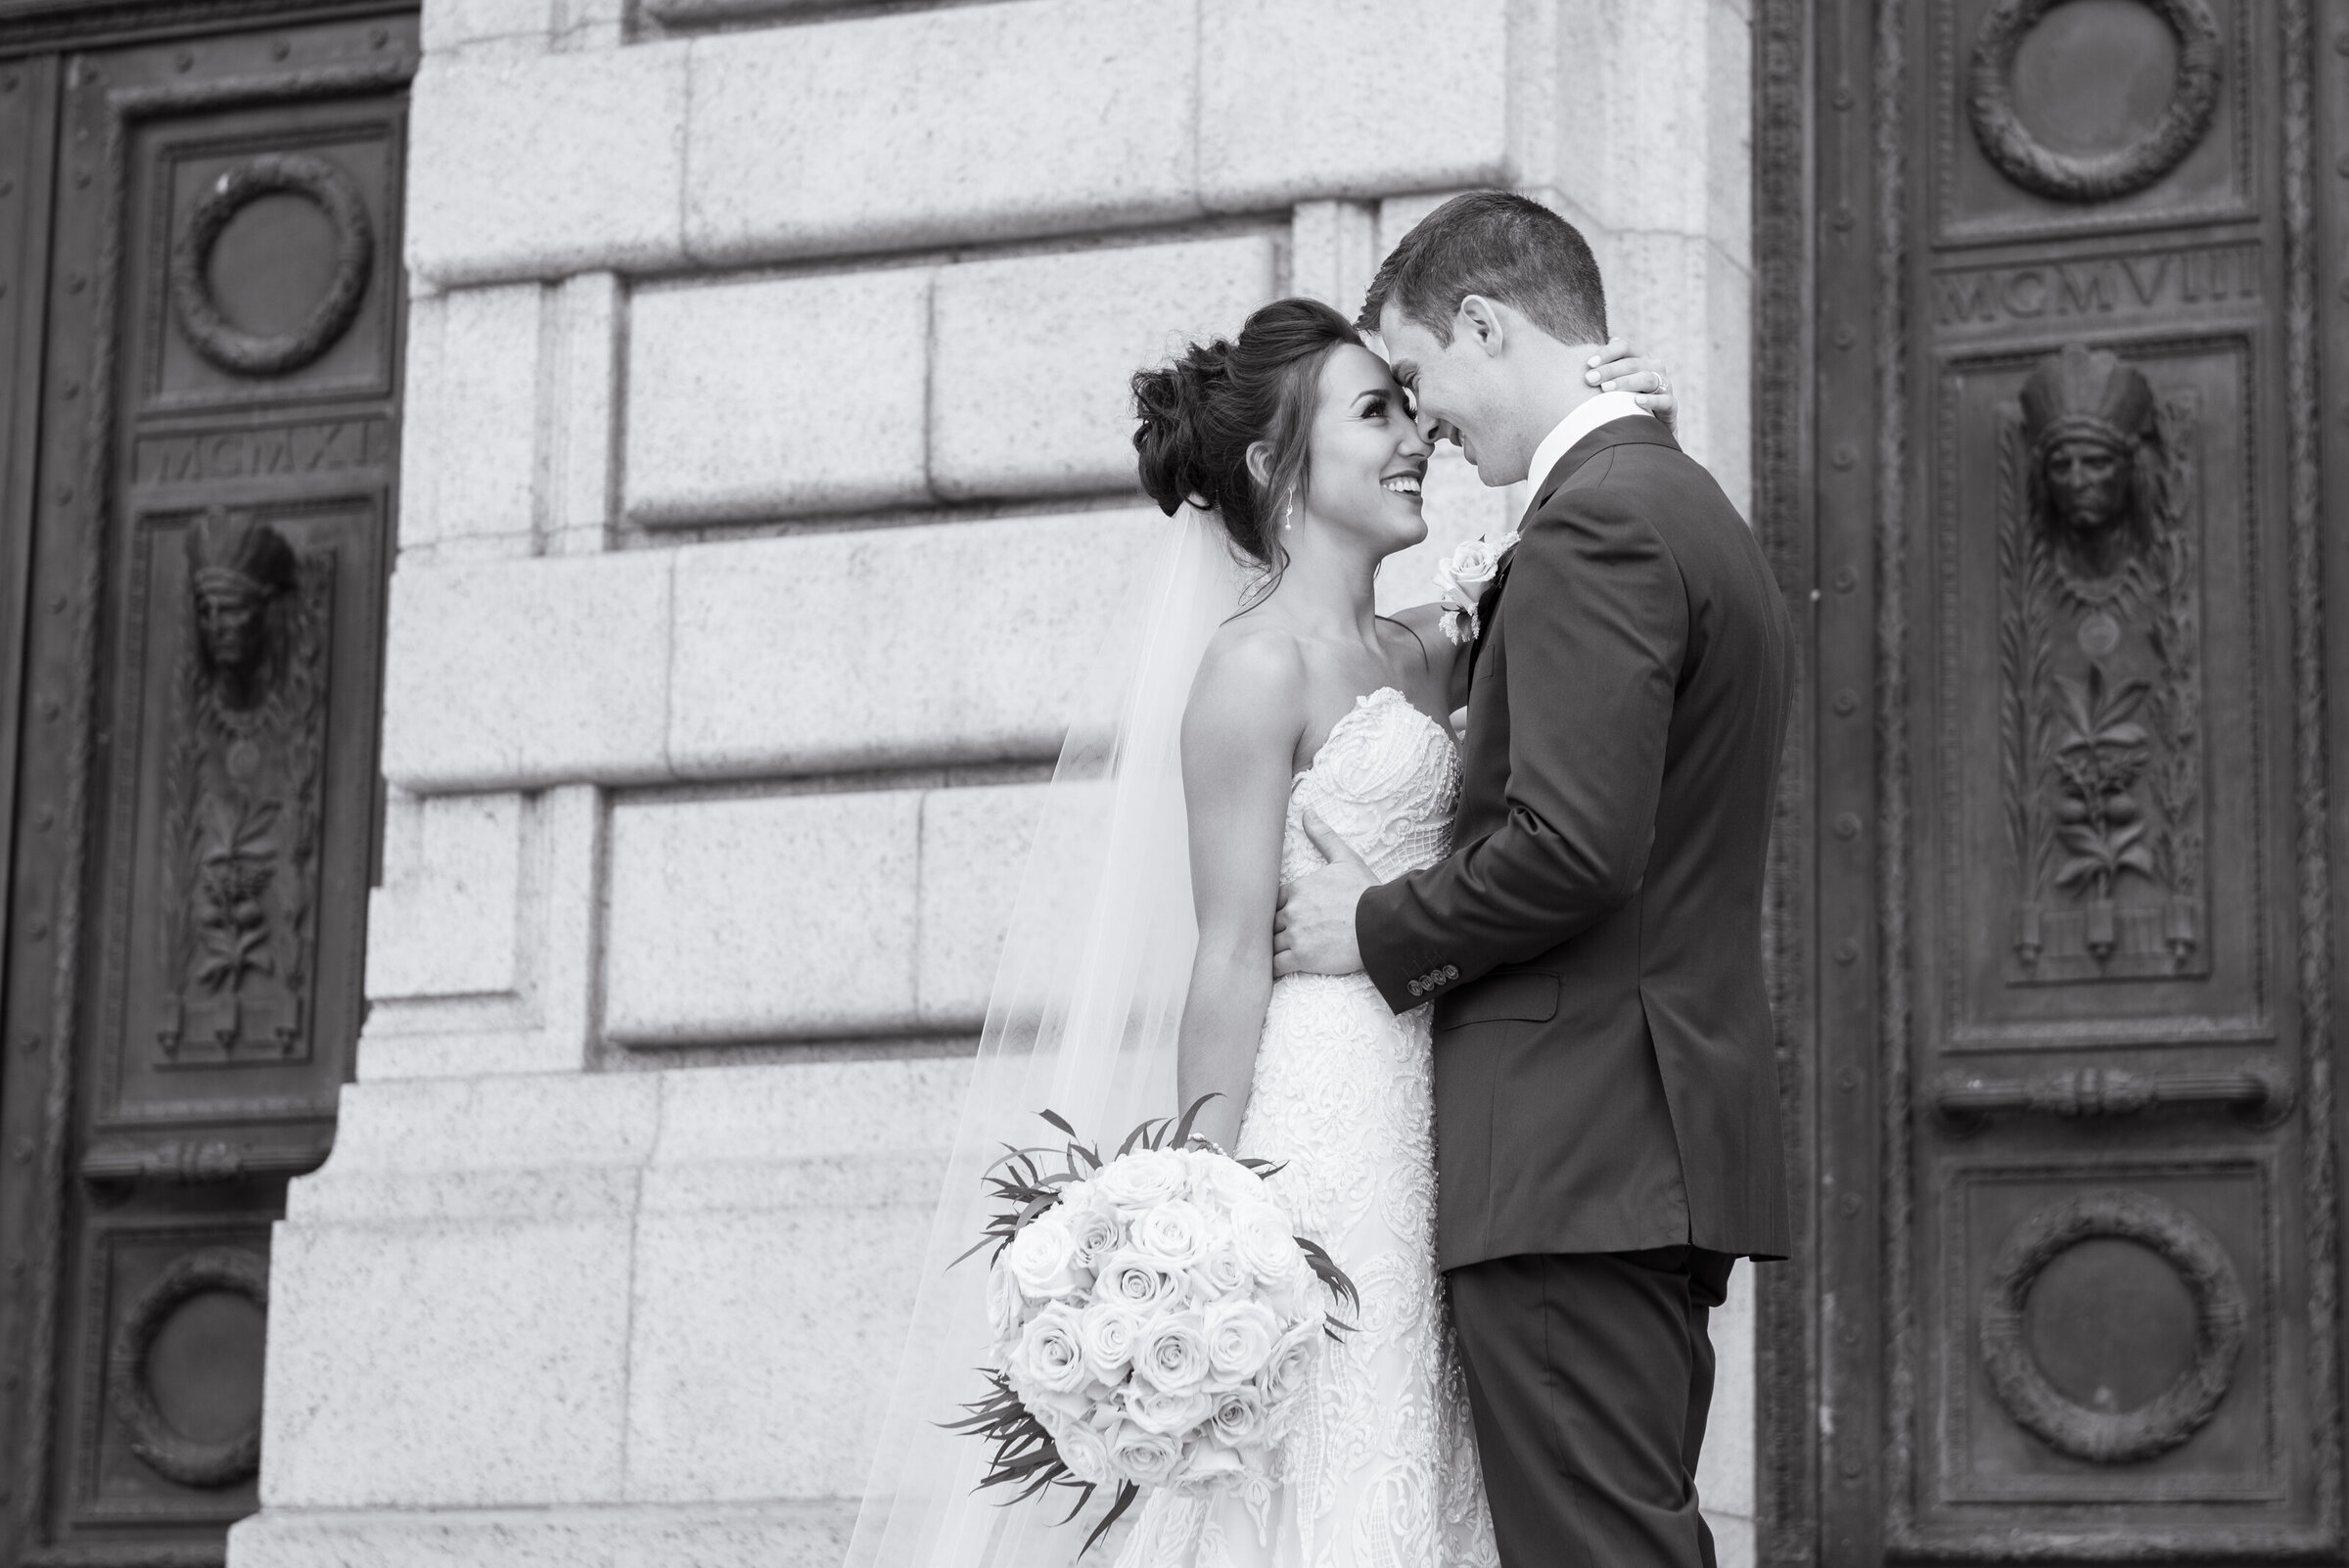 Cleveland bride and groom share in a candid and genuine moment behind The Old Courthouse in Cleveland Ohio on their wedding day. Photo taken by Aaron Aldhizer